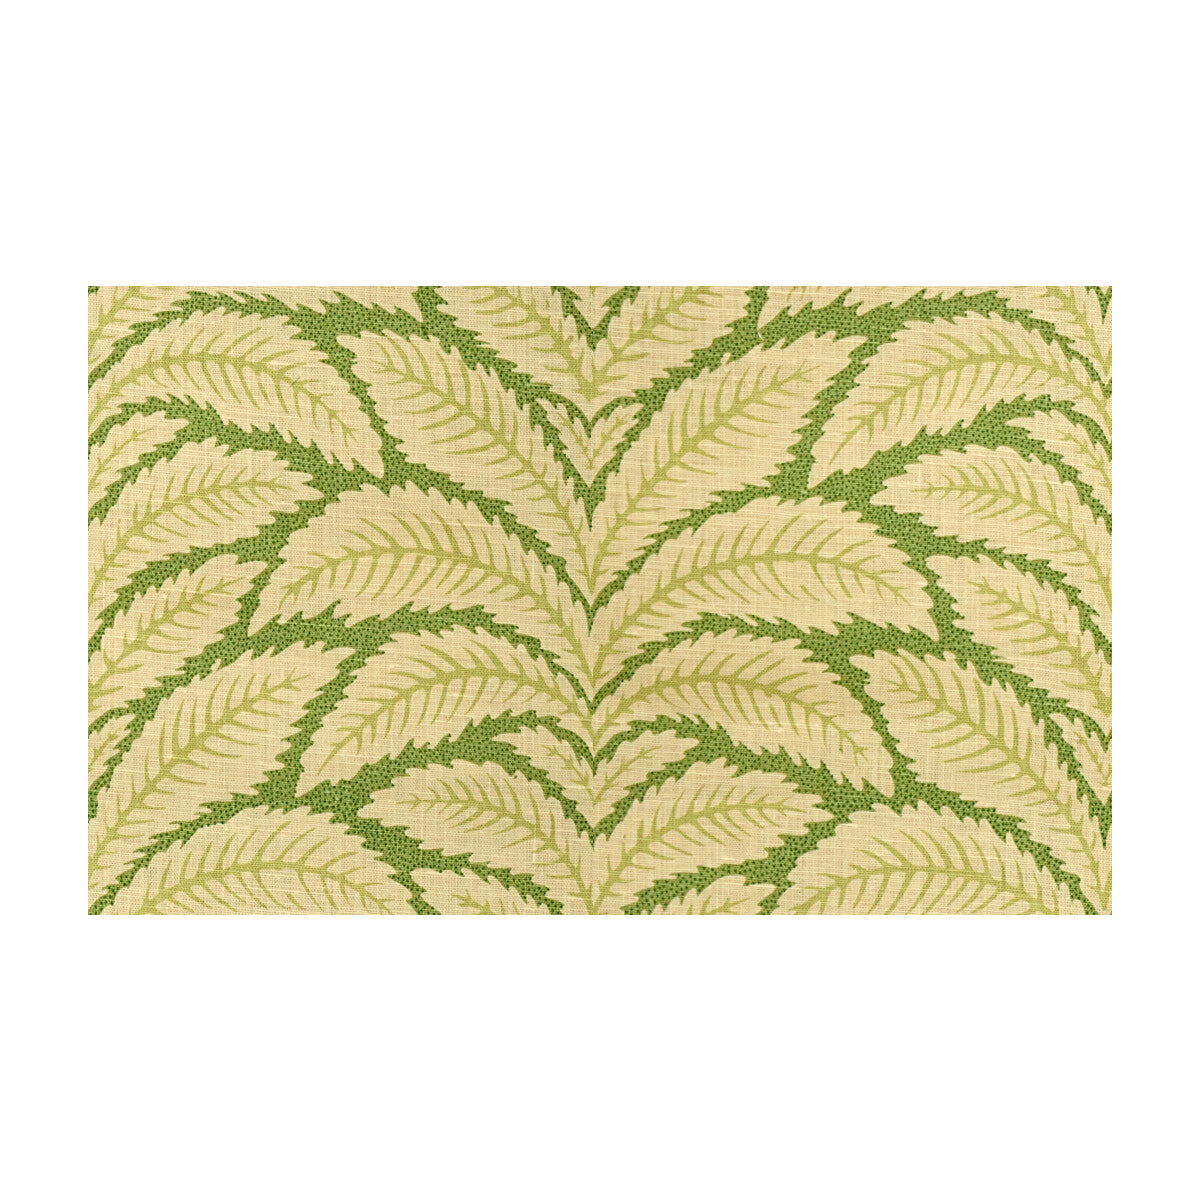 Talavera Linen fabric in leaf color - pattern 8014104.3.0 - by Brunschwig &amp; Fils in the Maisonnette collection